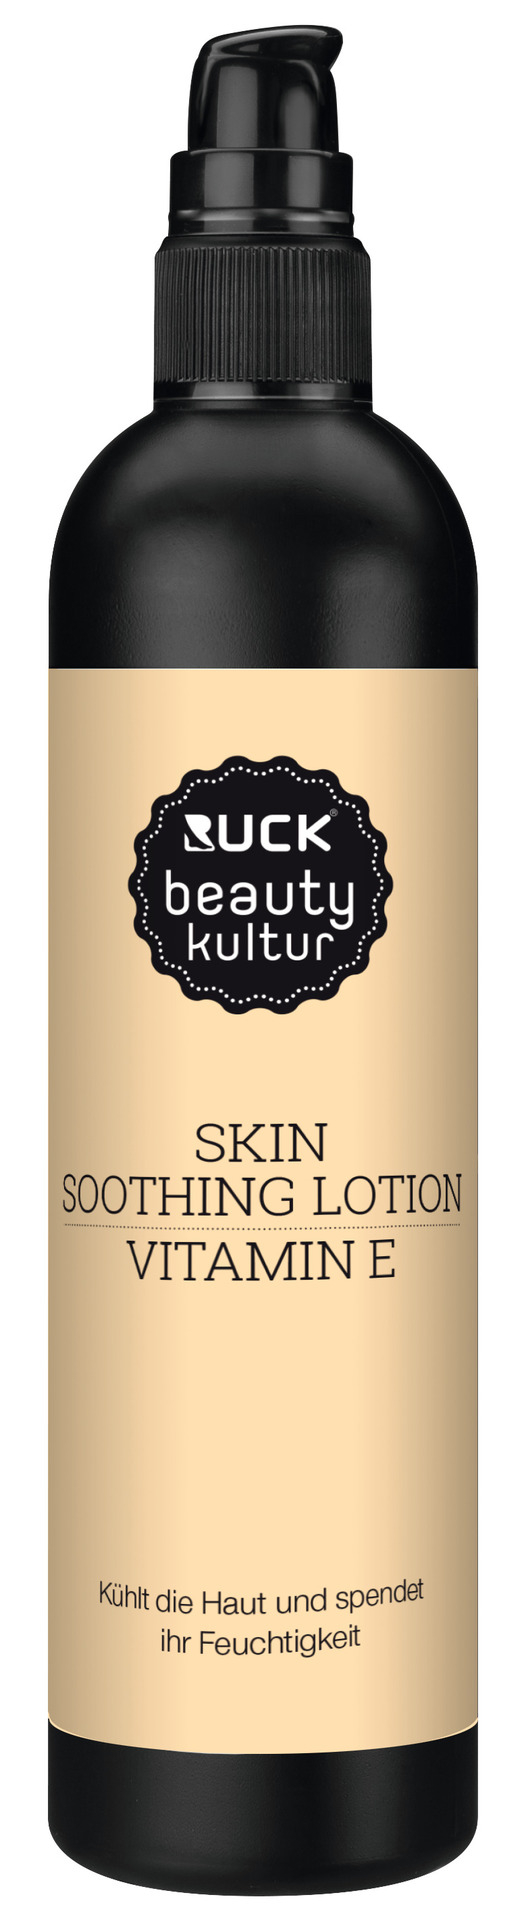 RUCK beautykultur SKIN soothing Lotion | 200 ml